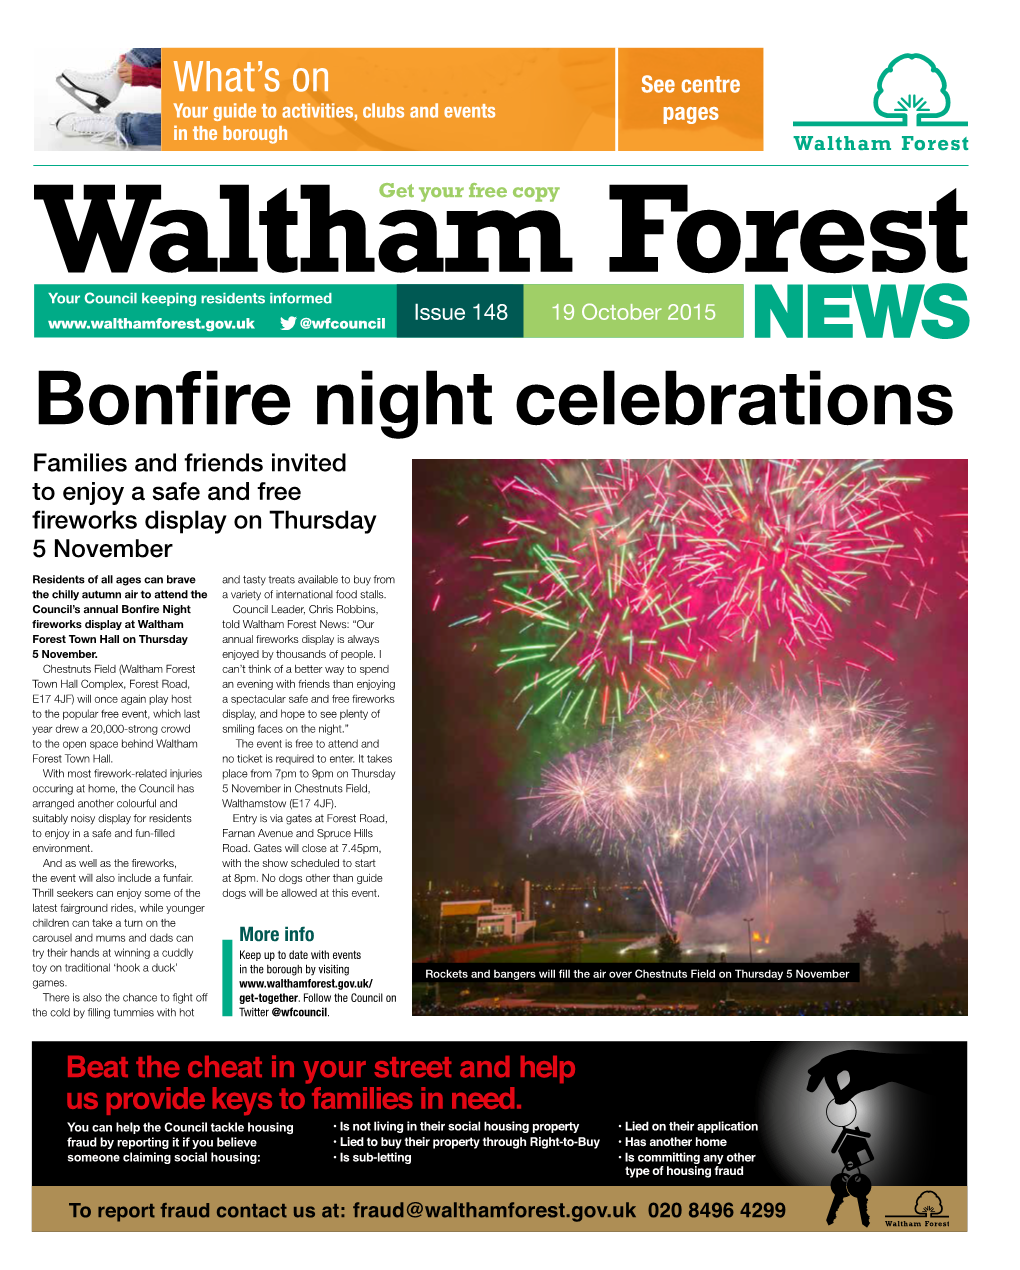 Bonfire Night Celebrations Families and Friends Invited to Enjoy a Safe and Free Fireworks Display on Thursday 5 November